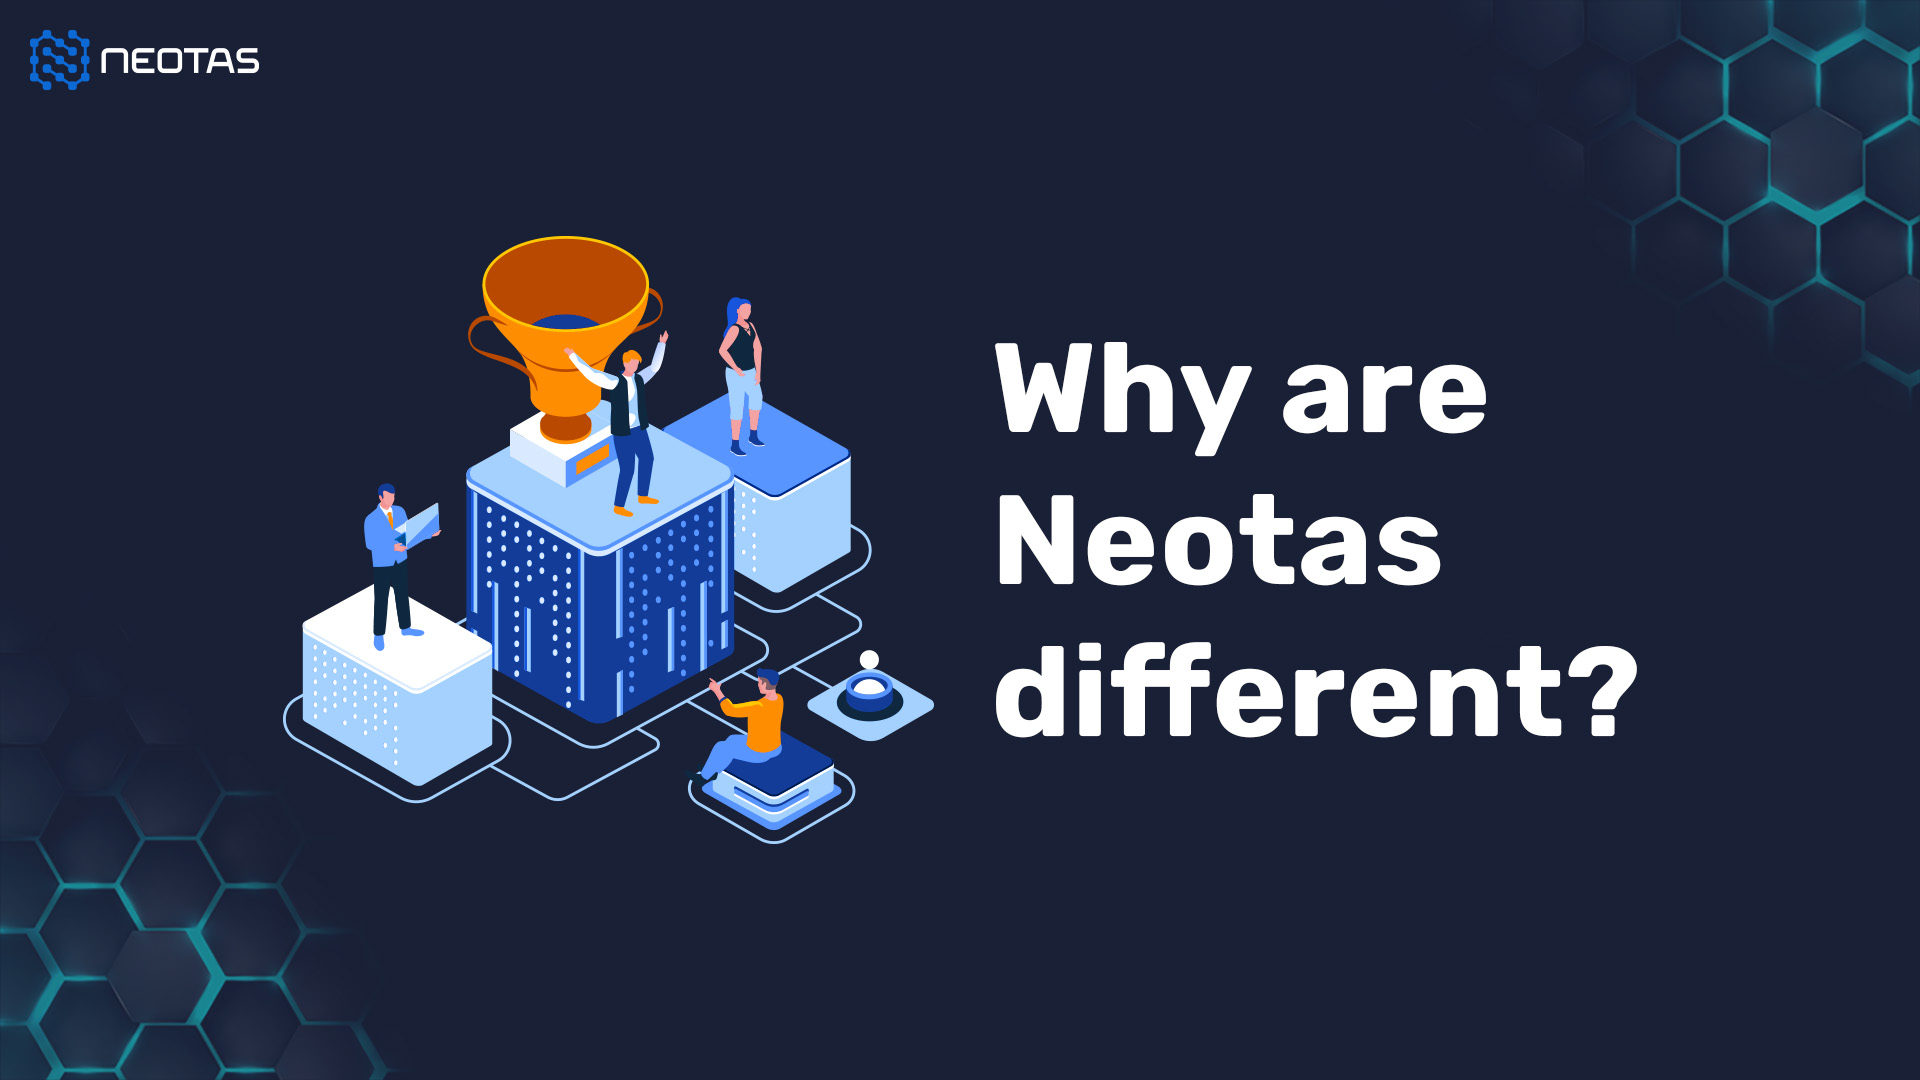 Podium shot with Neotas on top, text asking "Why are Neotas different?"